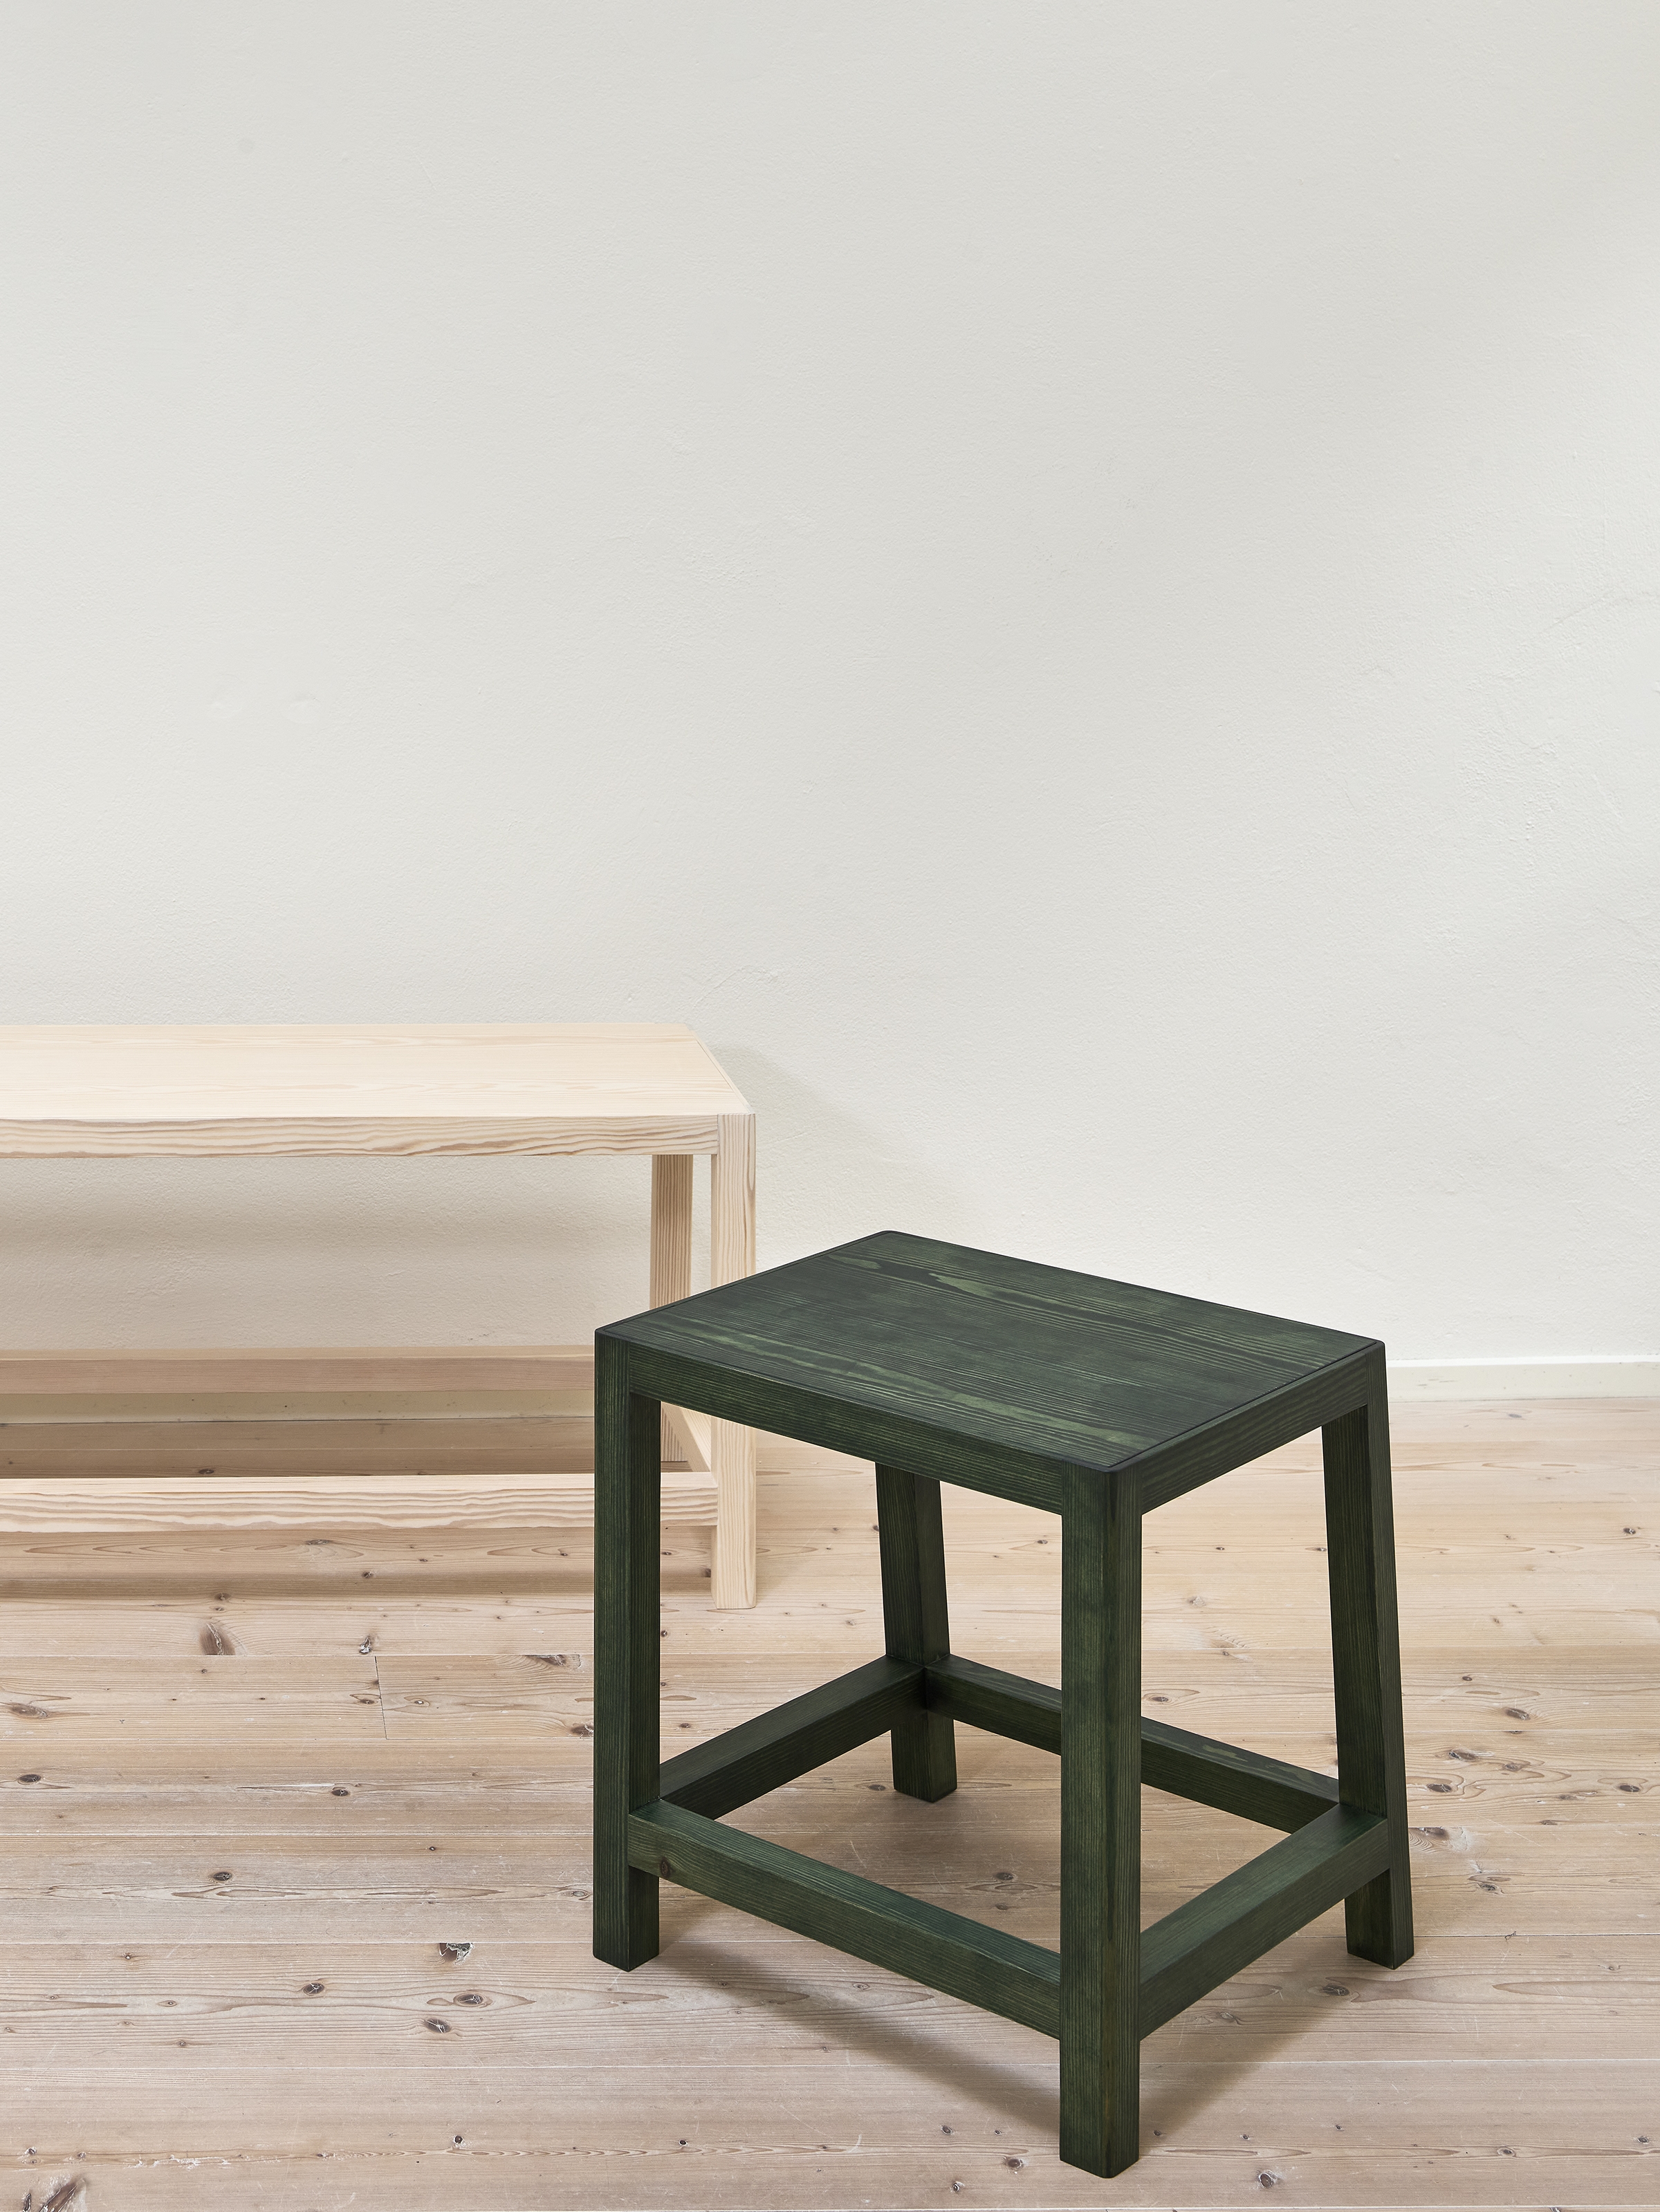 Workshop Stool in Forest Green together with Workshop Bench in White pigmented oil